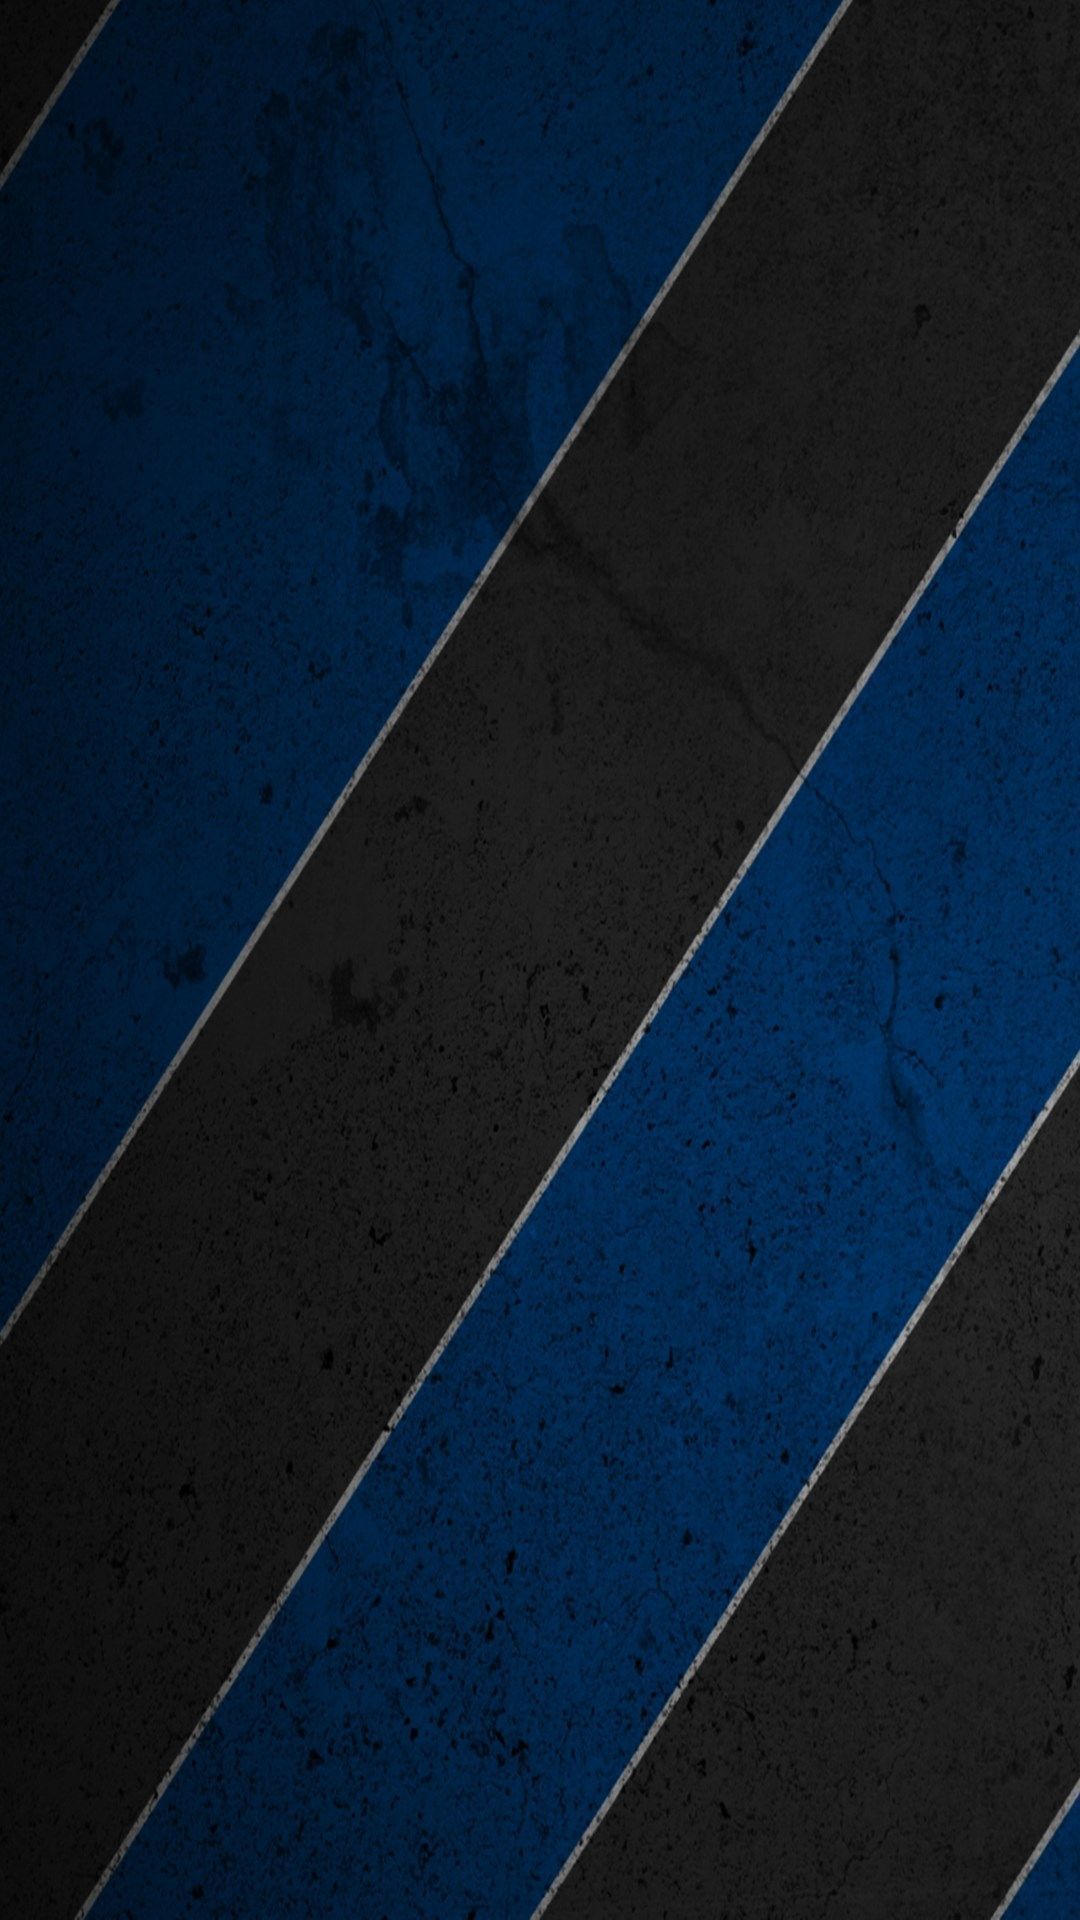 Android Abstract wallpaper full hd 1080x1920 black and blue